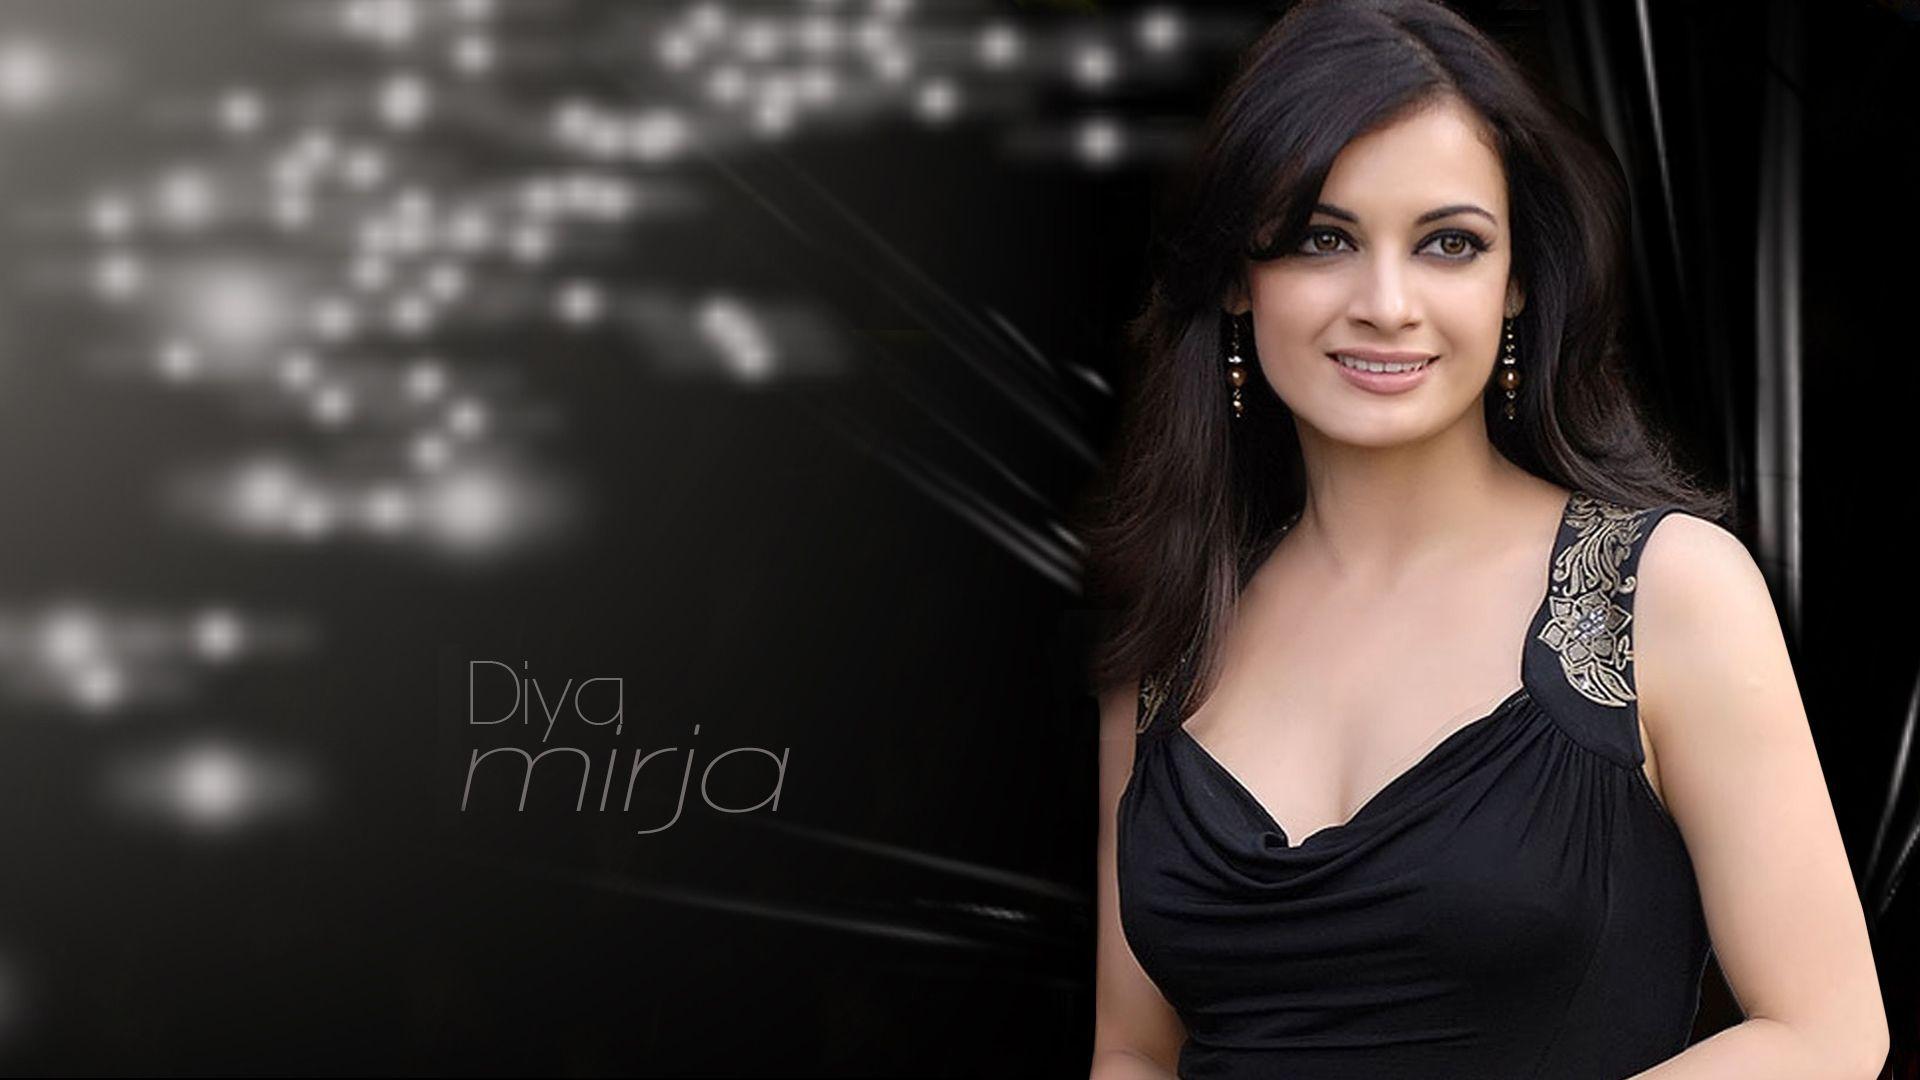 HD 1080p Wallpapers Of Bollywood Actress - Wallpaper Cave